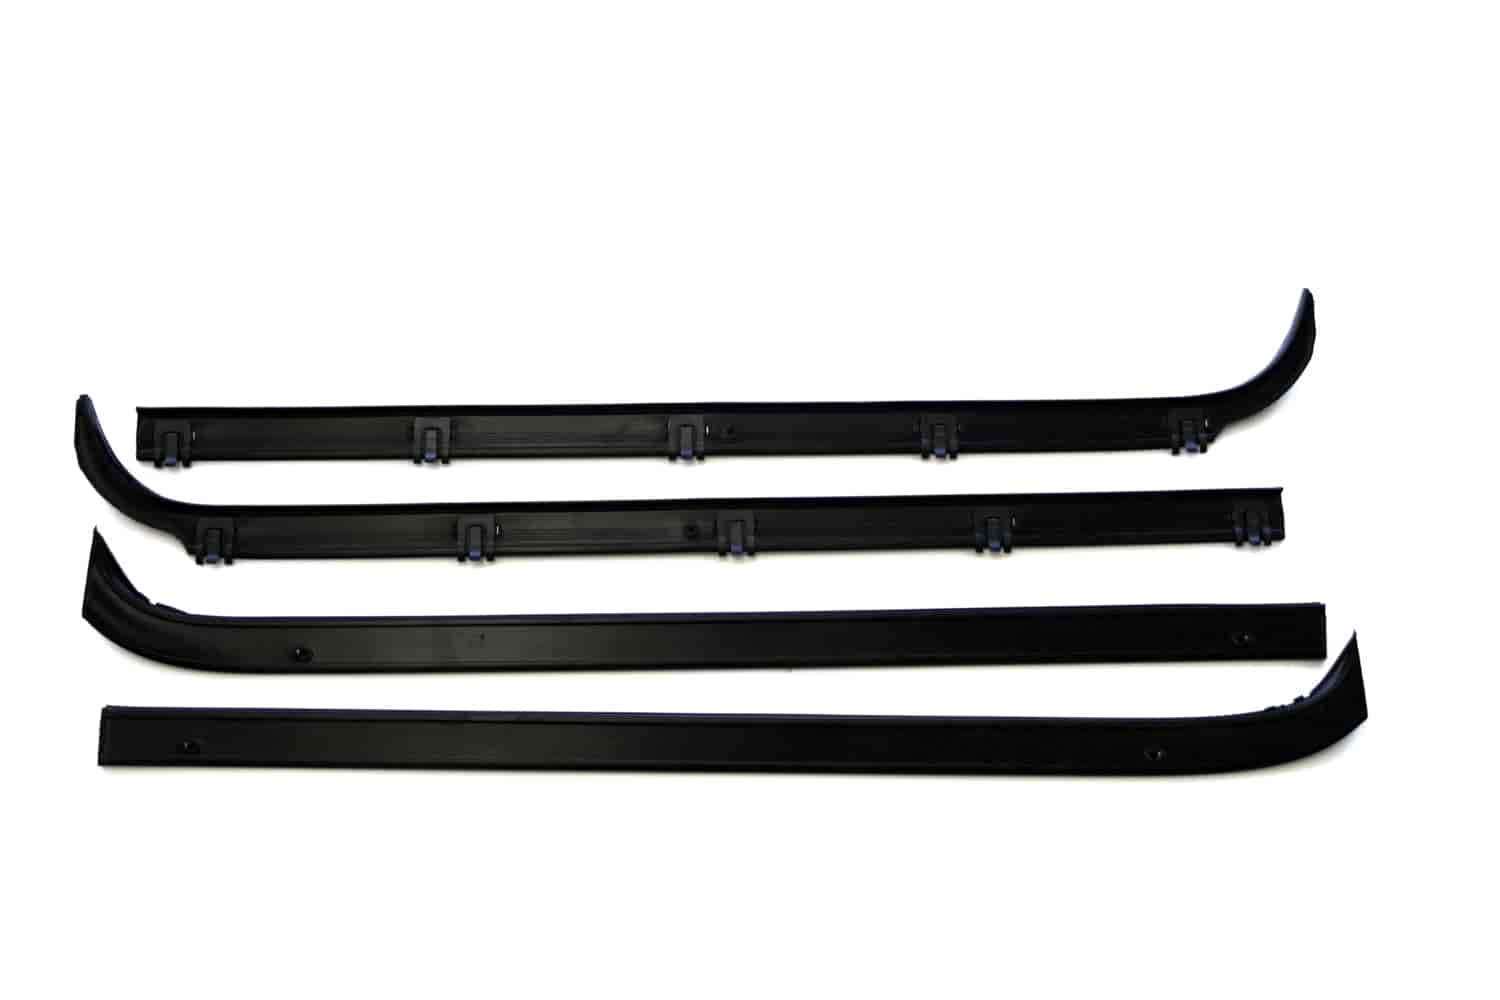 1985 Ford Bronco Window sweeper kit. Fits 80-87 Ford Bronco and Truck 2 Door Extended/Standard-WC 6600-12